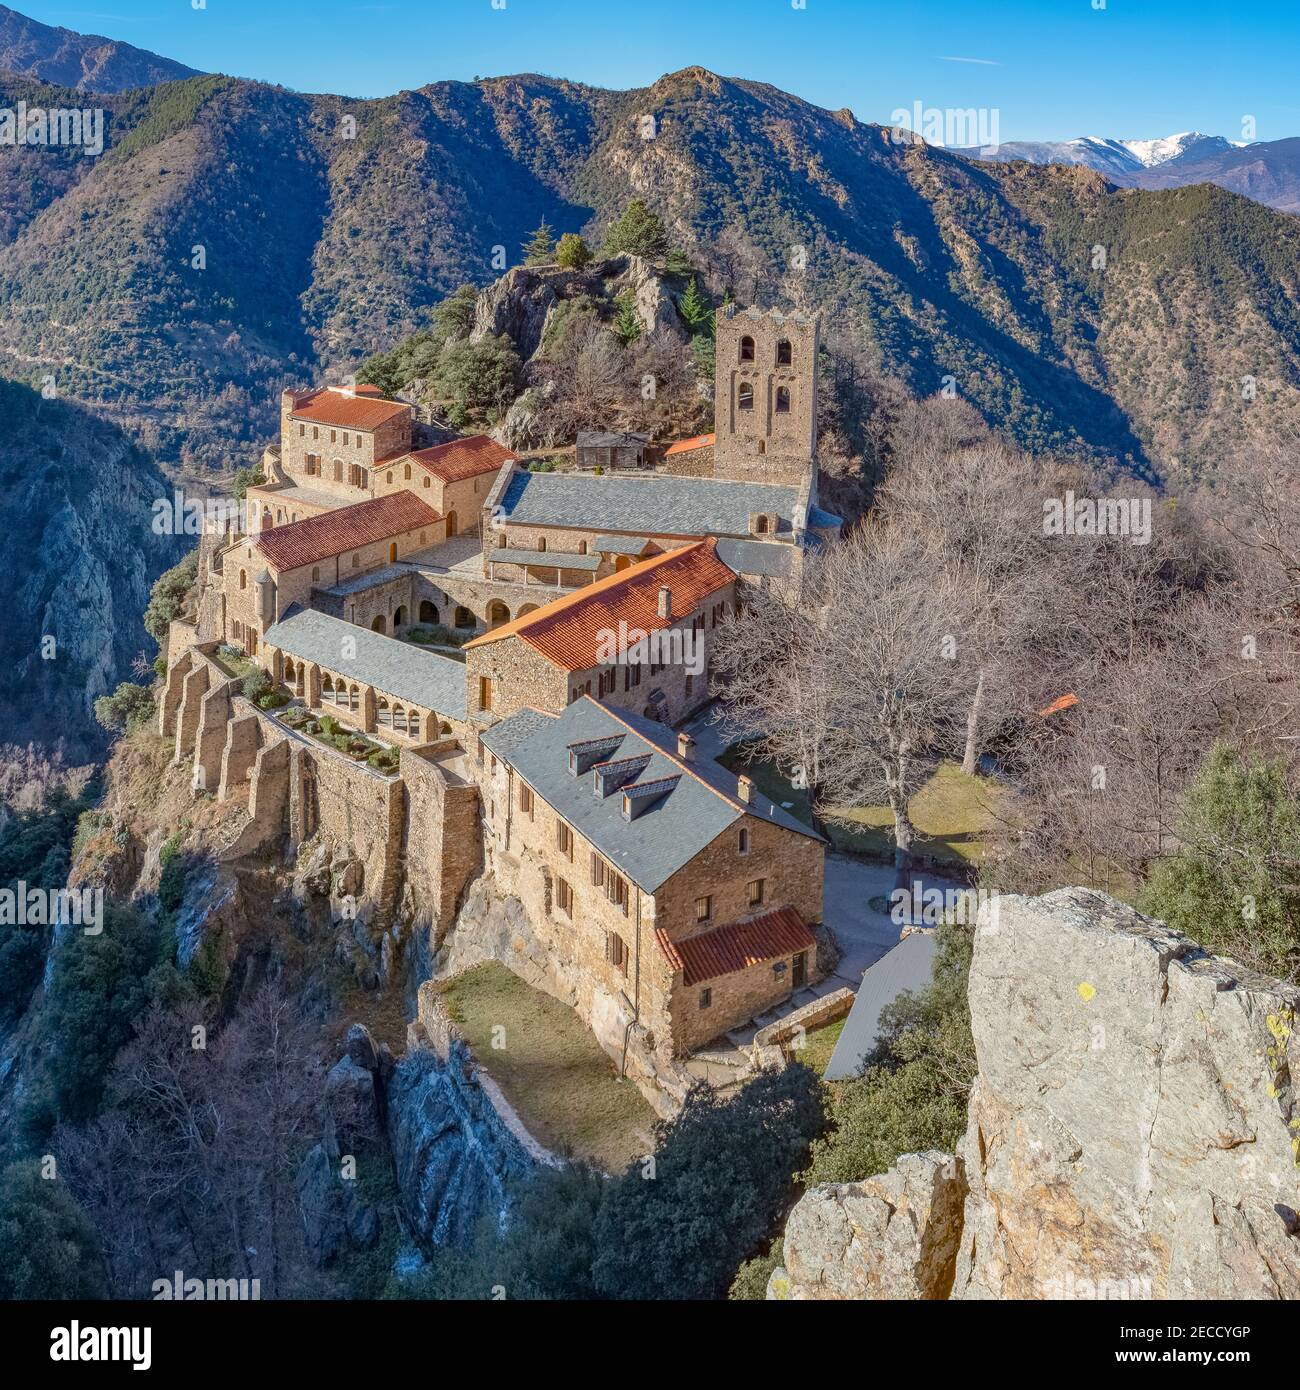 Best view of the Abbey of Saint-Martin-du-Canigou located in southern France, taken in winter Stock Photo